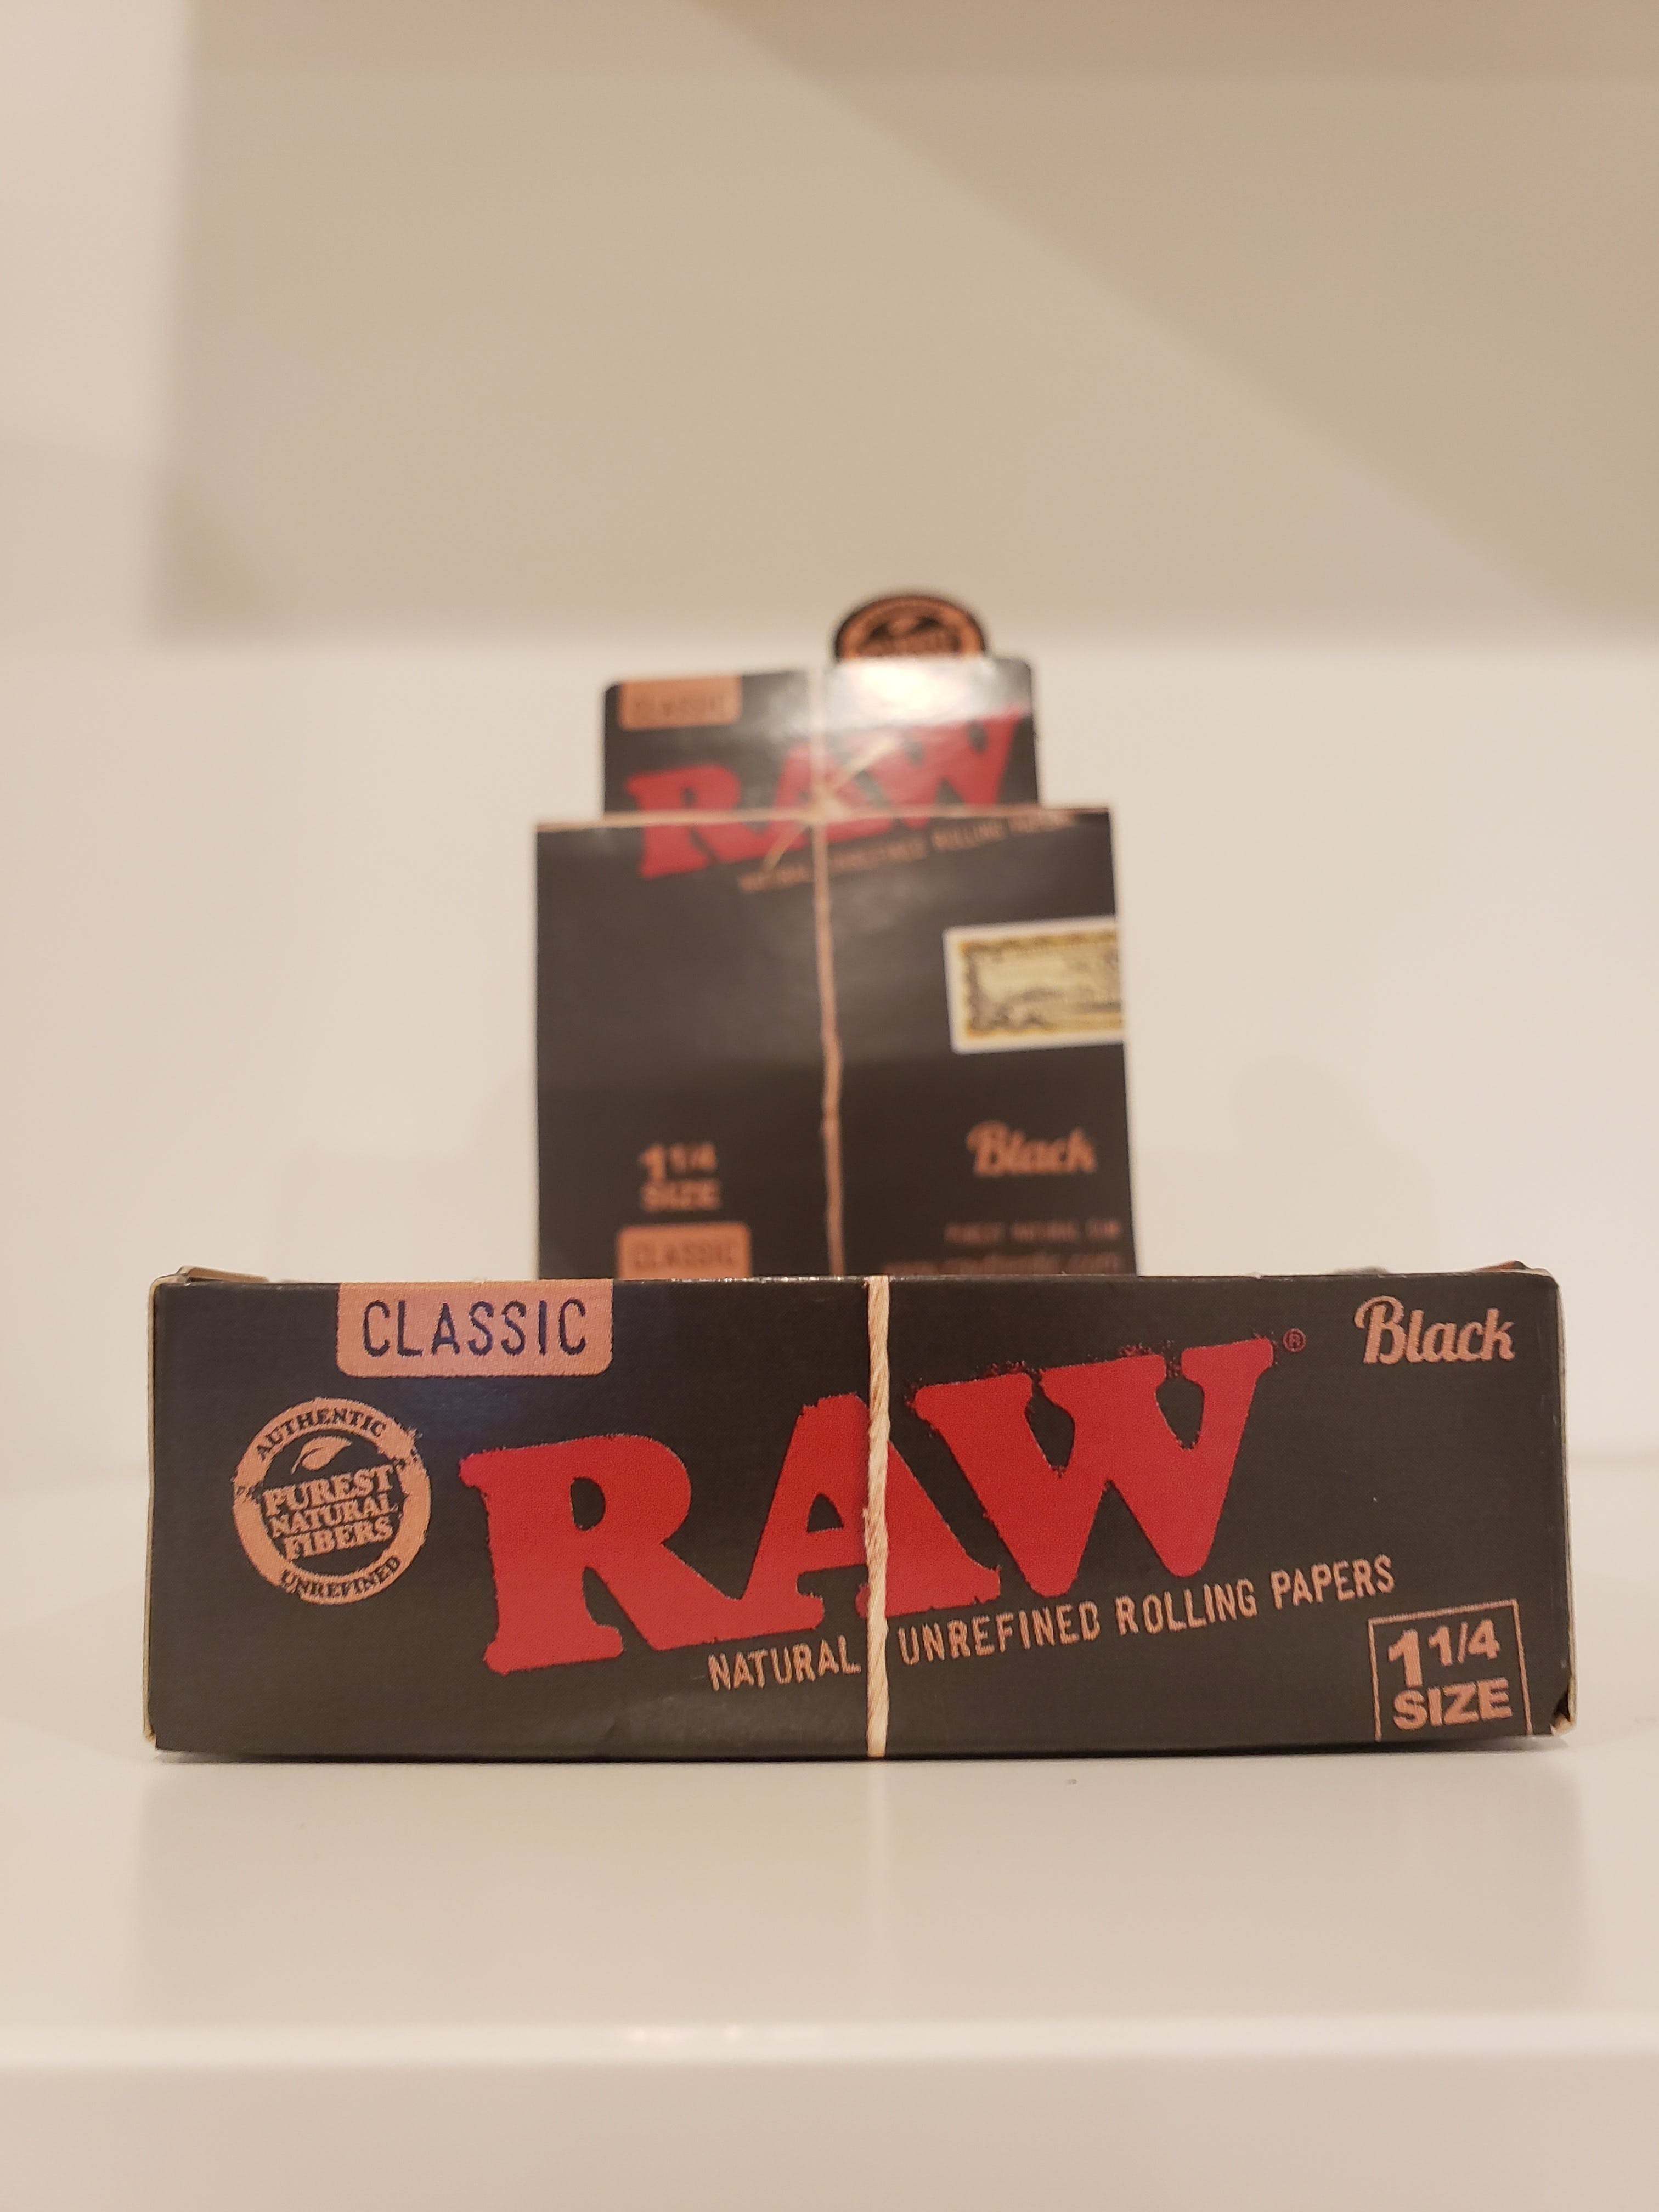 gear-papers-1-14-black-hemp-papers-raw